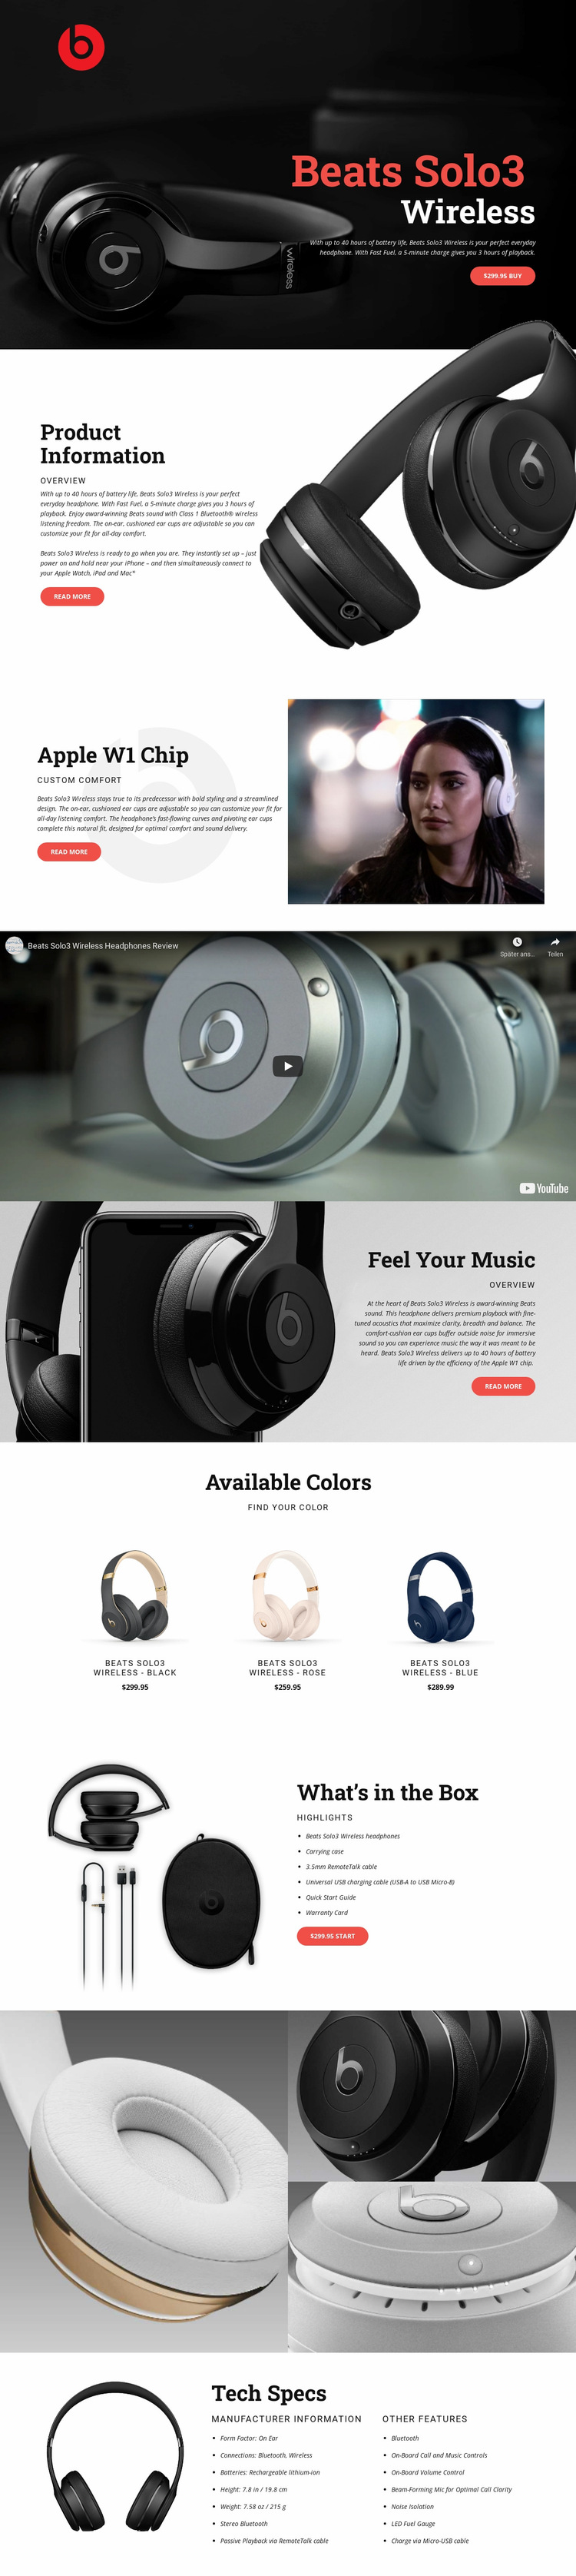 Outstanding quality of music Website Builder Templates